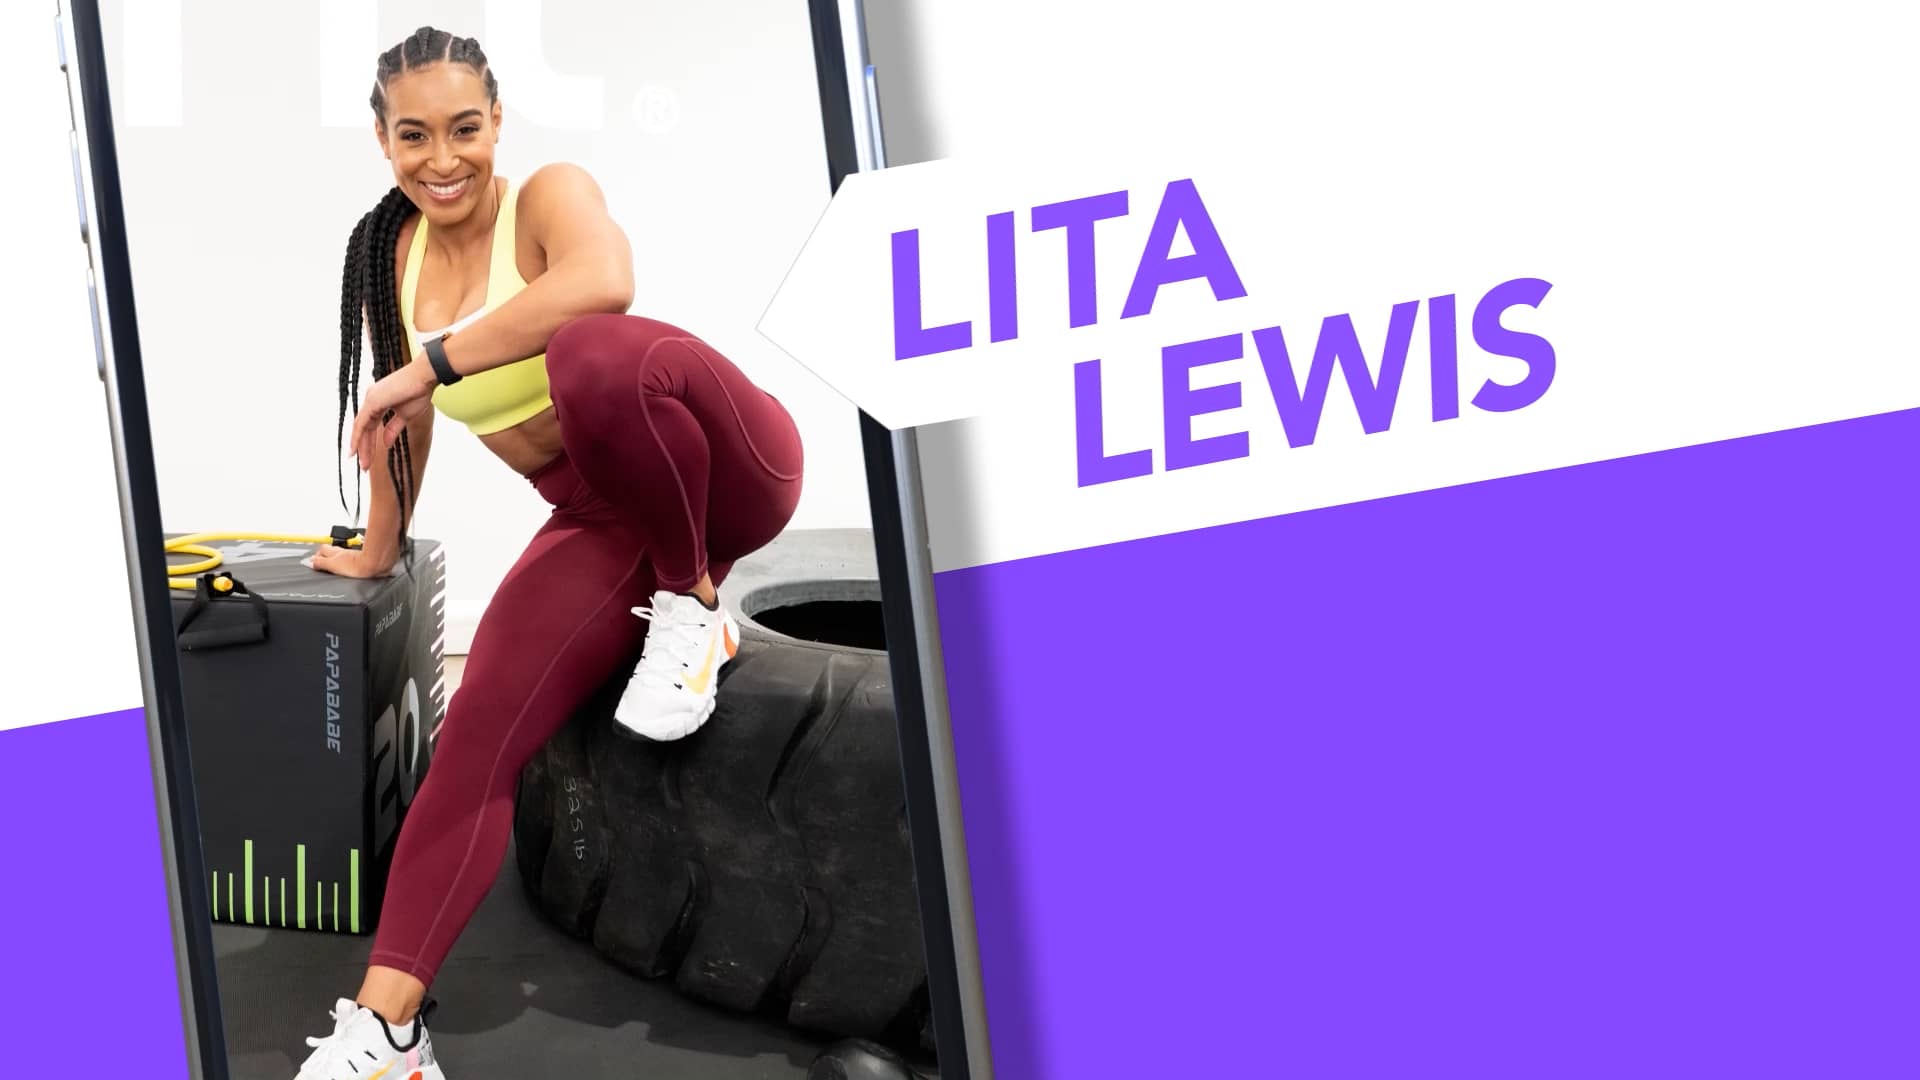 Strong + Solid with Lita Lewis Sample Workout Lower Body Heat 1 on Vimeo